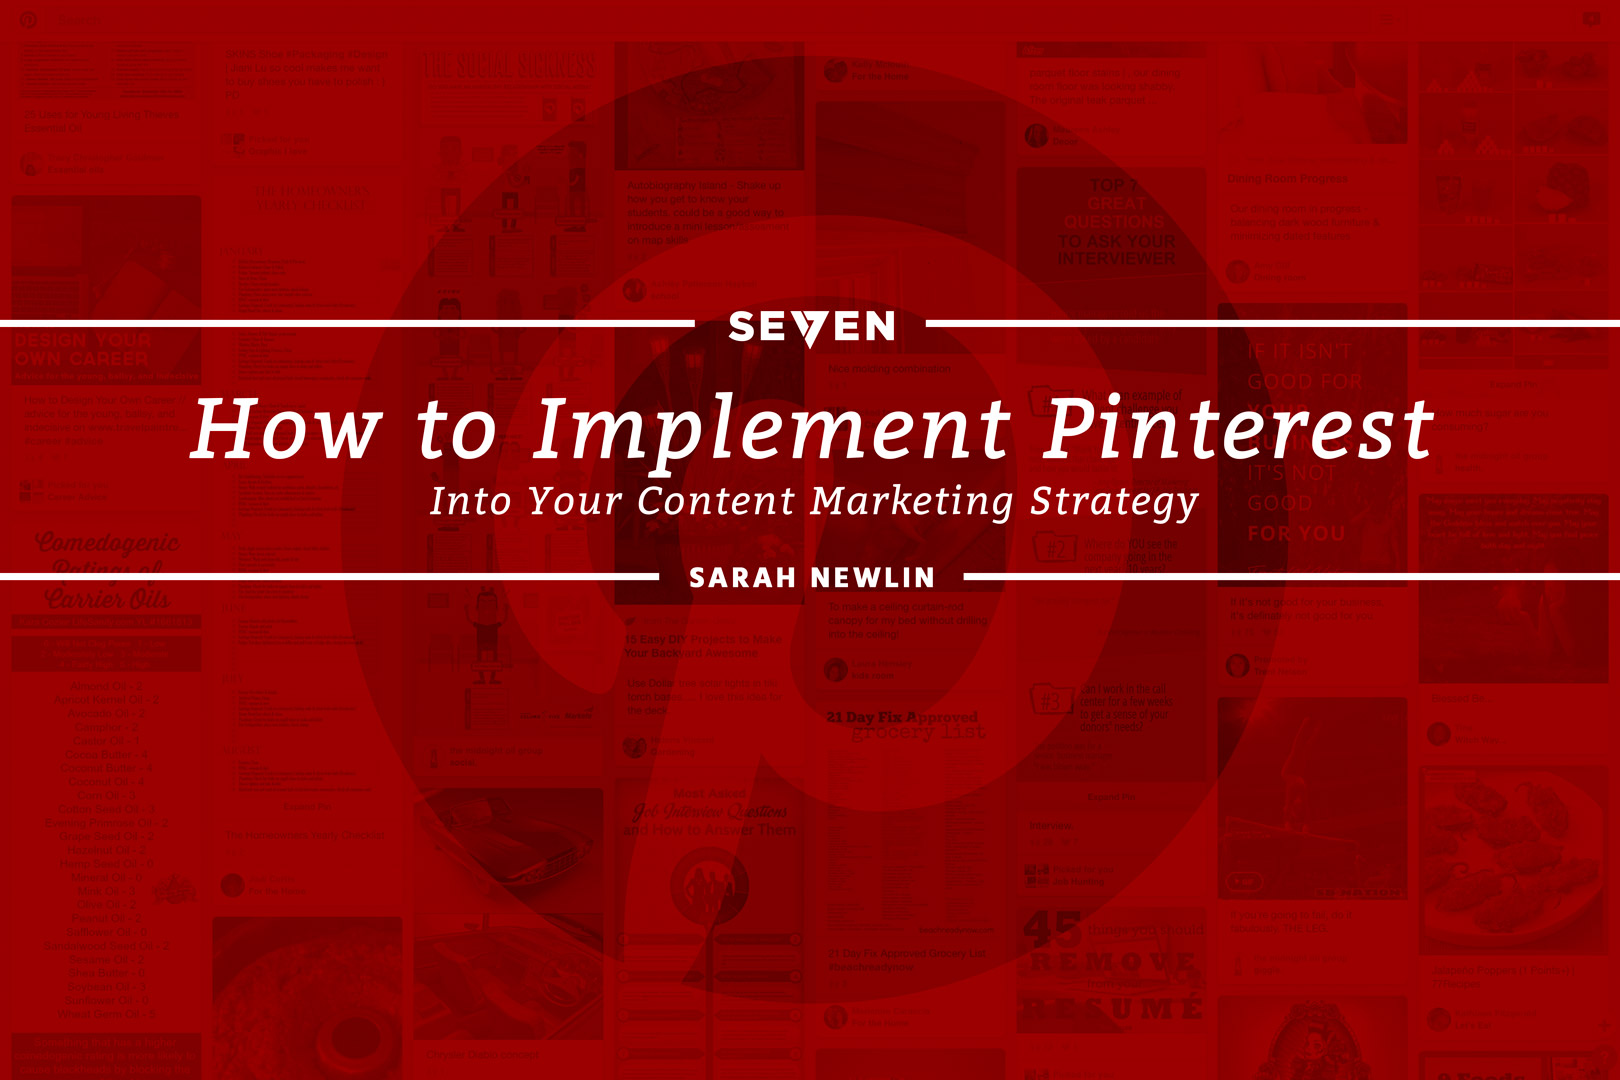 How to Implement Pinterest Into Your Content Marketing Strategy